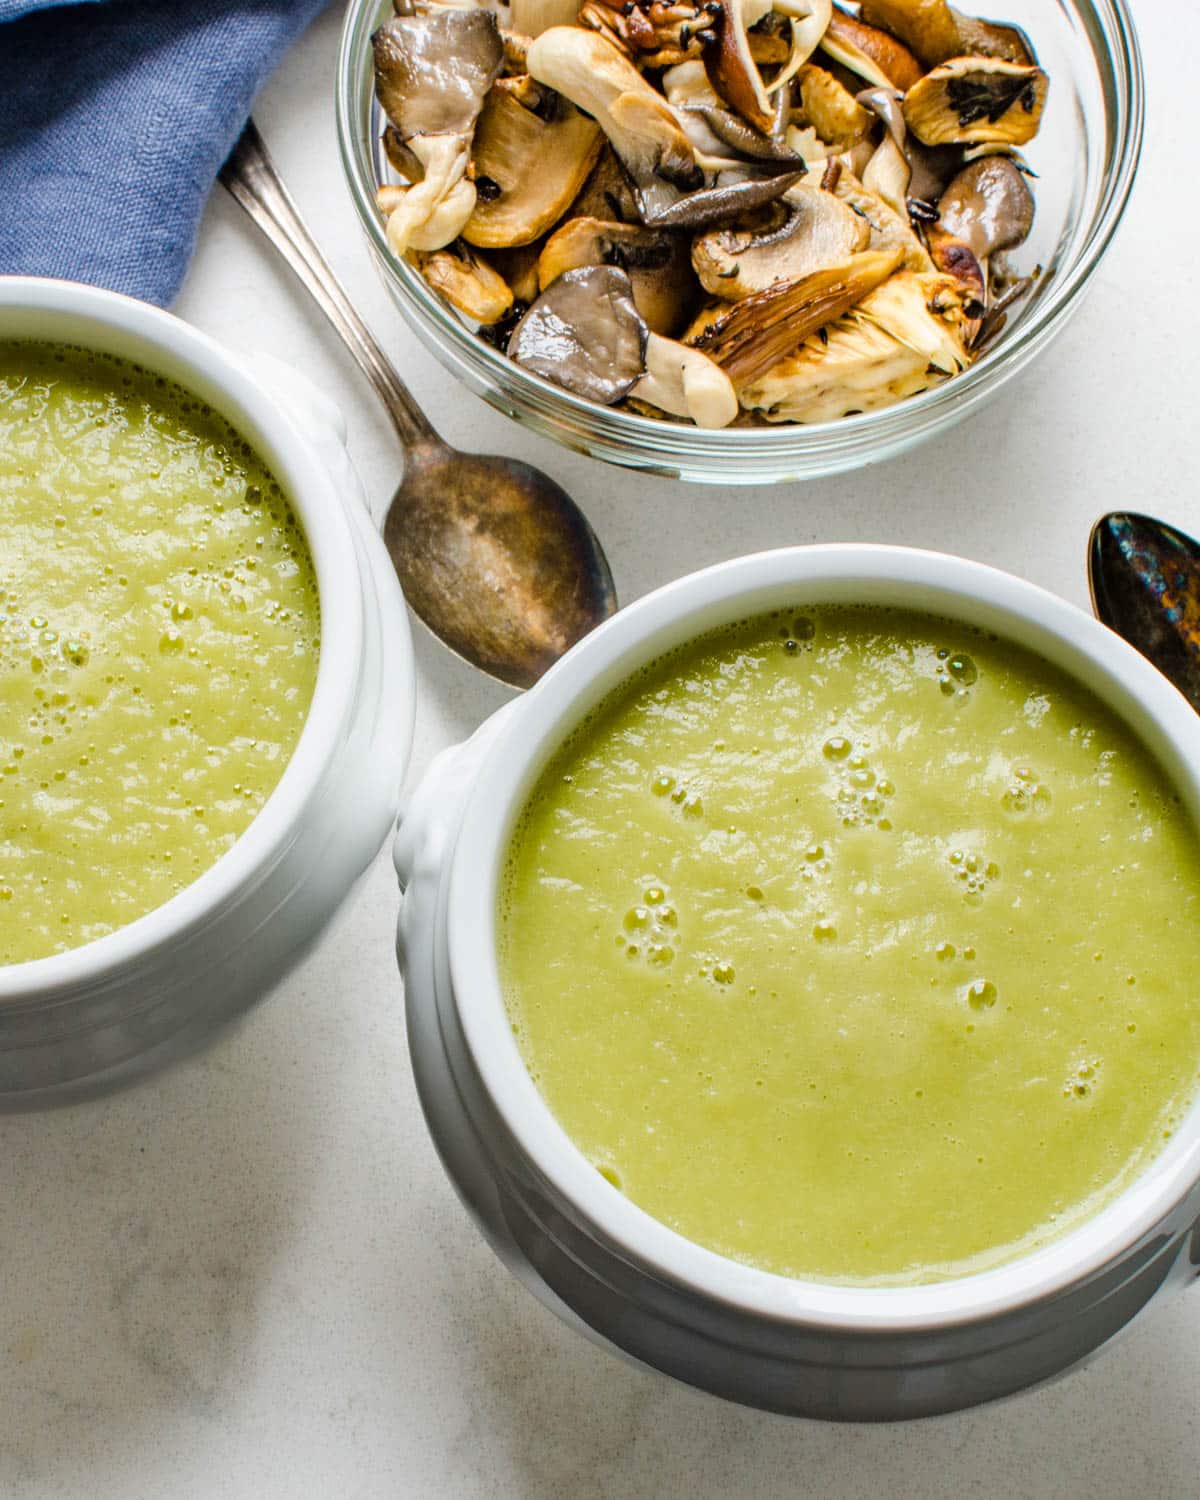 Ladling the creamy leek and fennel soup into bowls.